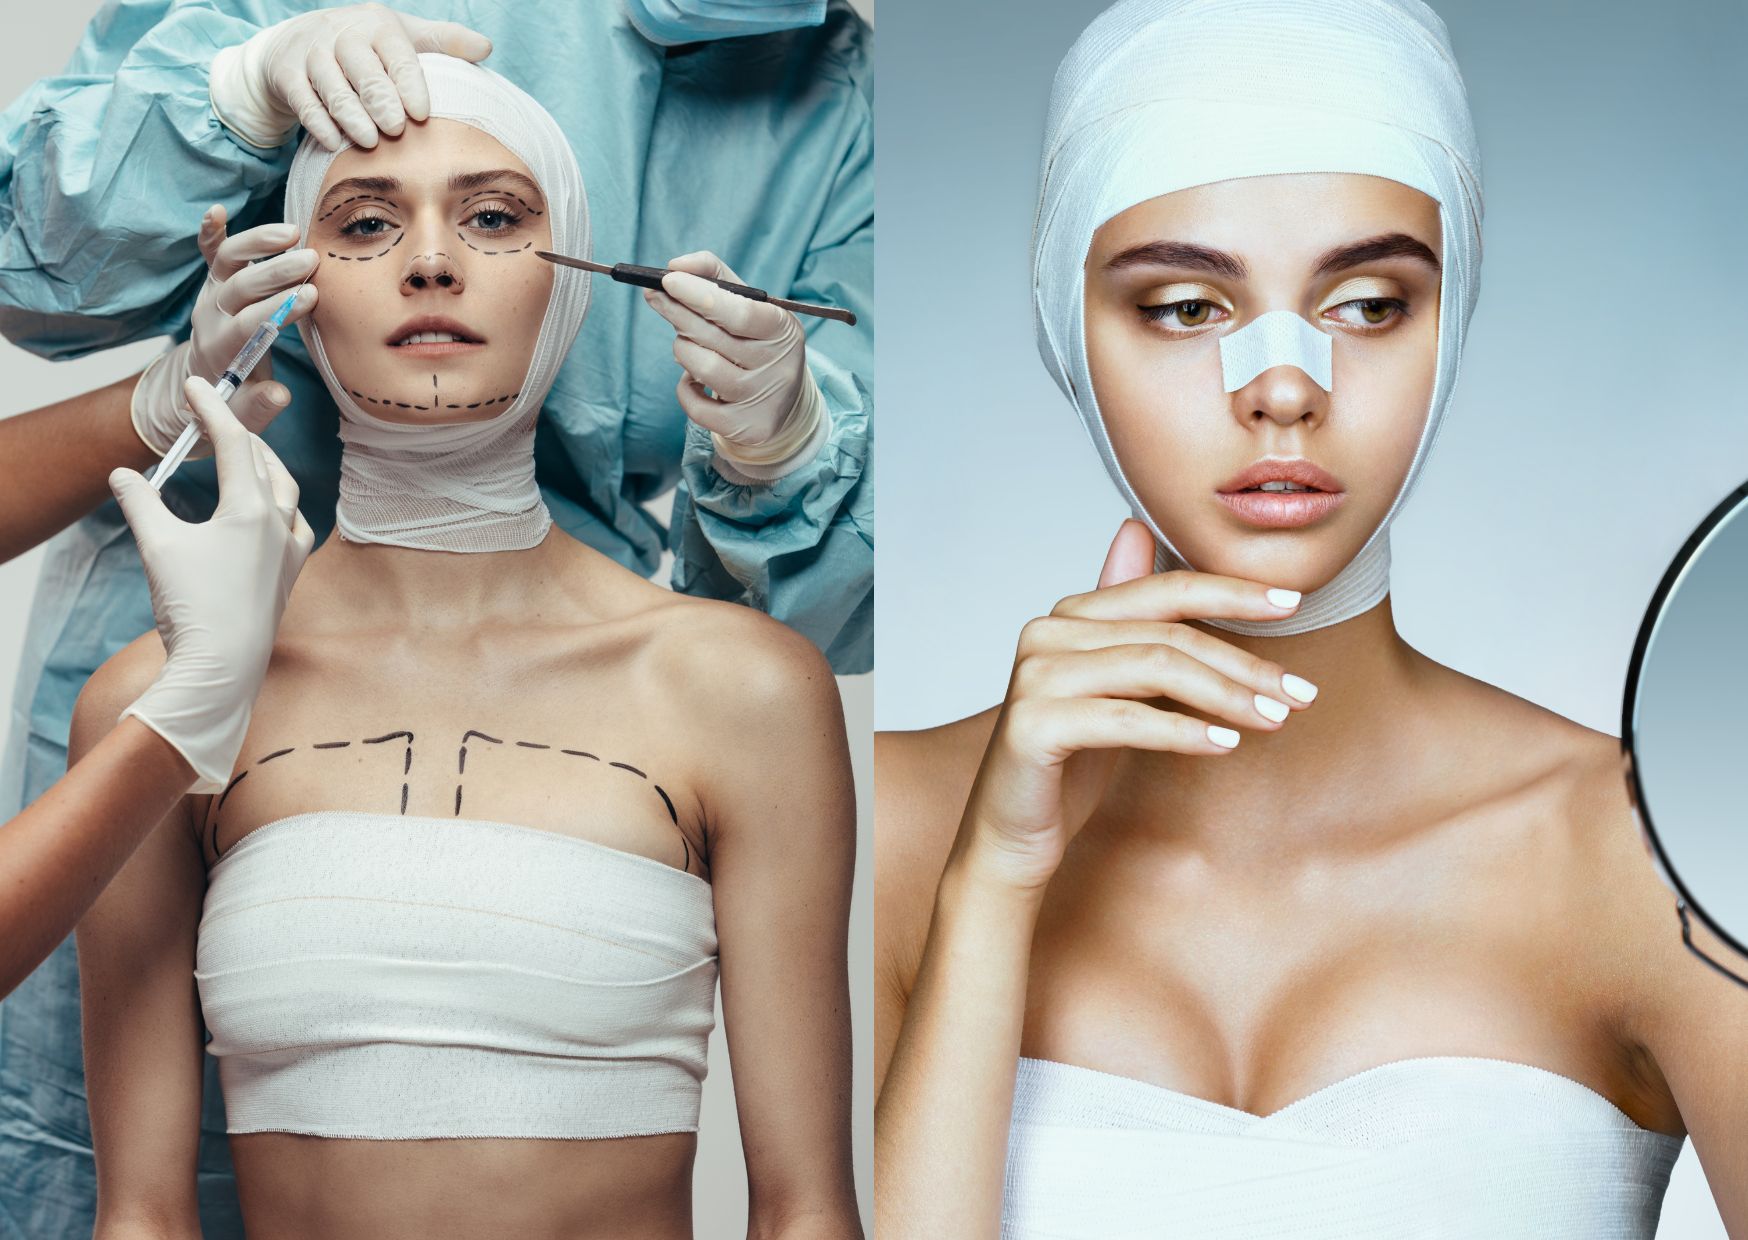 why a trained nurse or doctor should perform cosmetic surgery